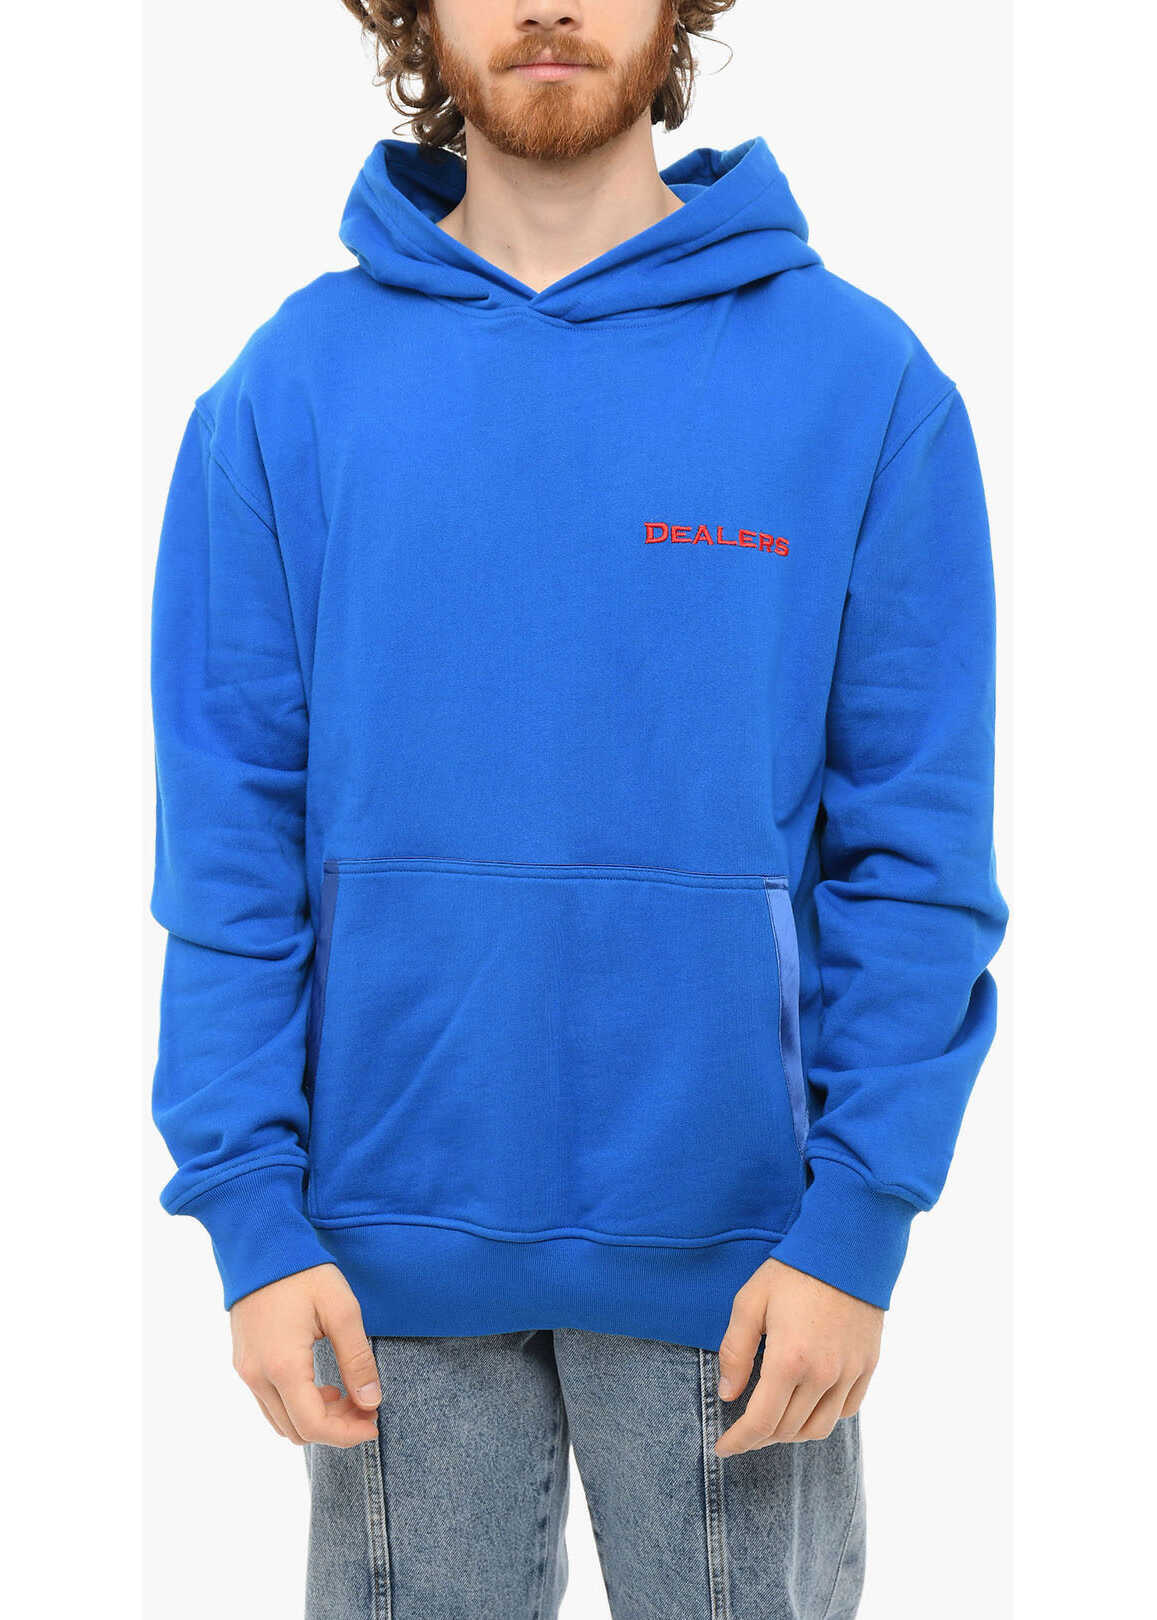 JUST DON Brushed Cotton Embroidered Dealers Hoodie Blue